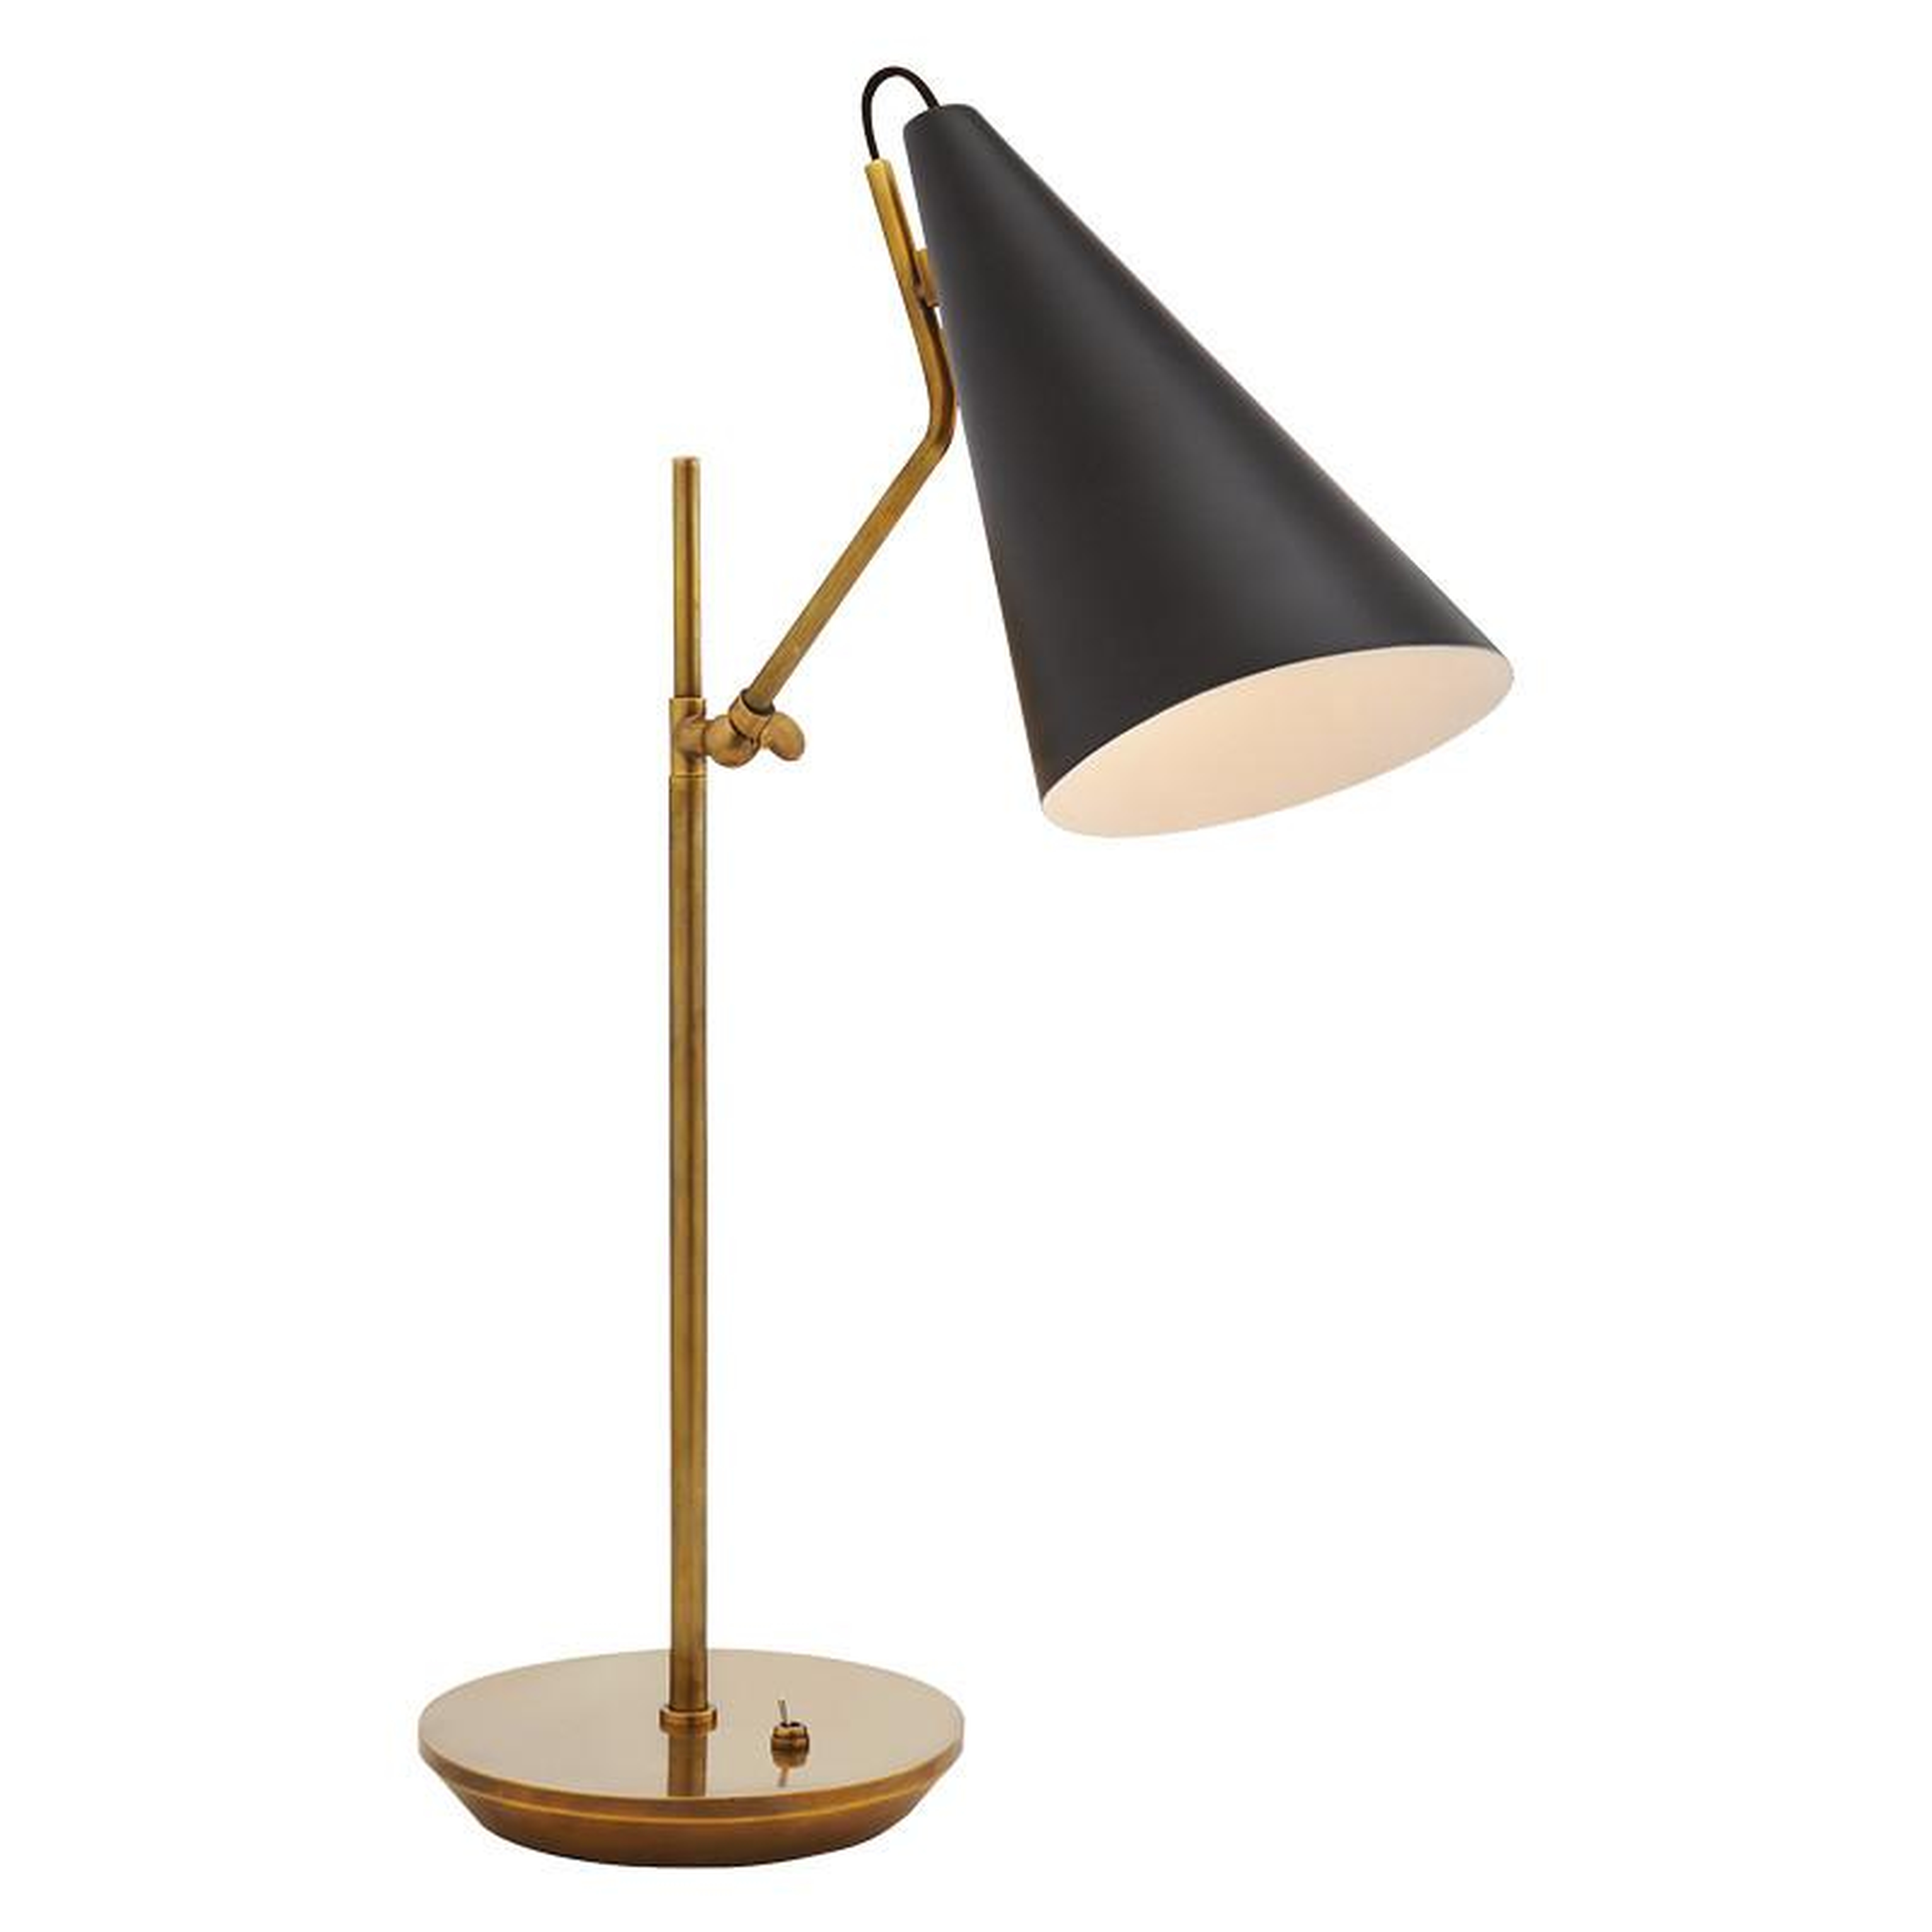 CLEMENTE TABLE LAMP WITH BLACK SHADE - McGee & Co.